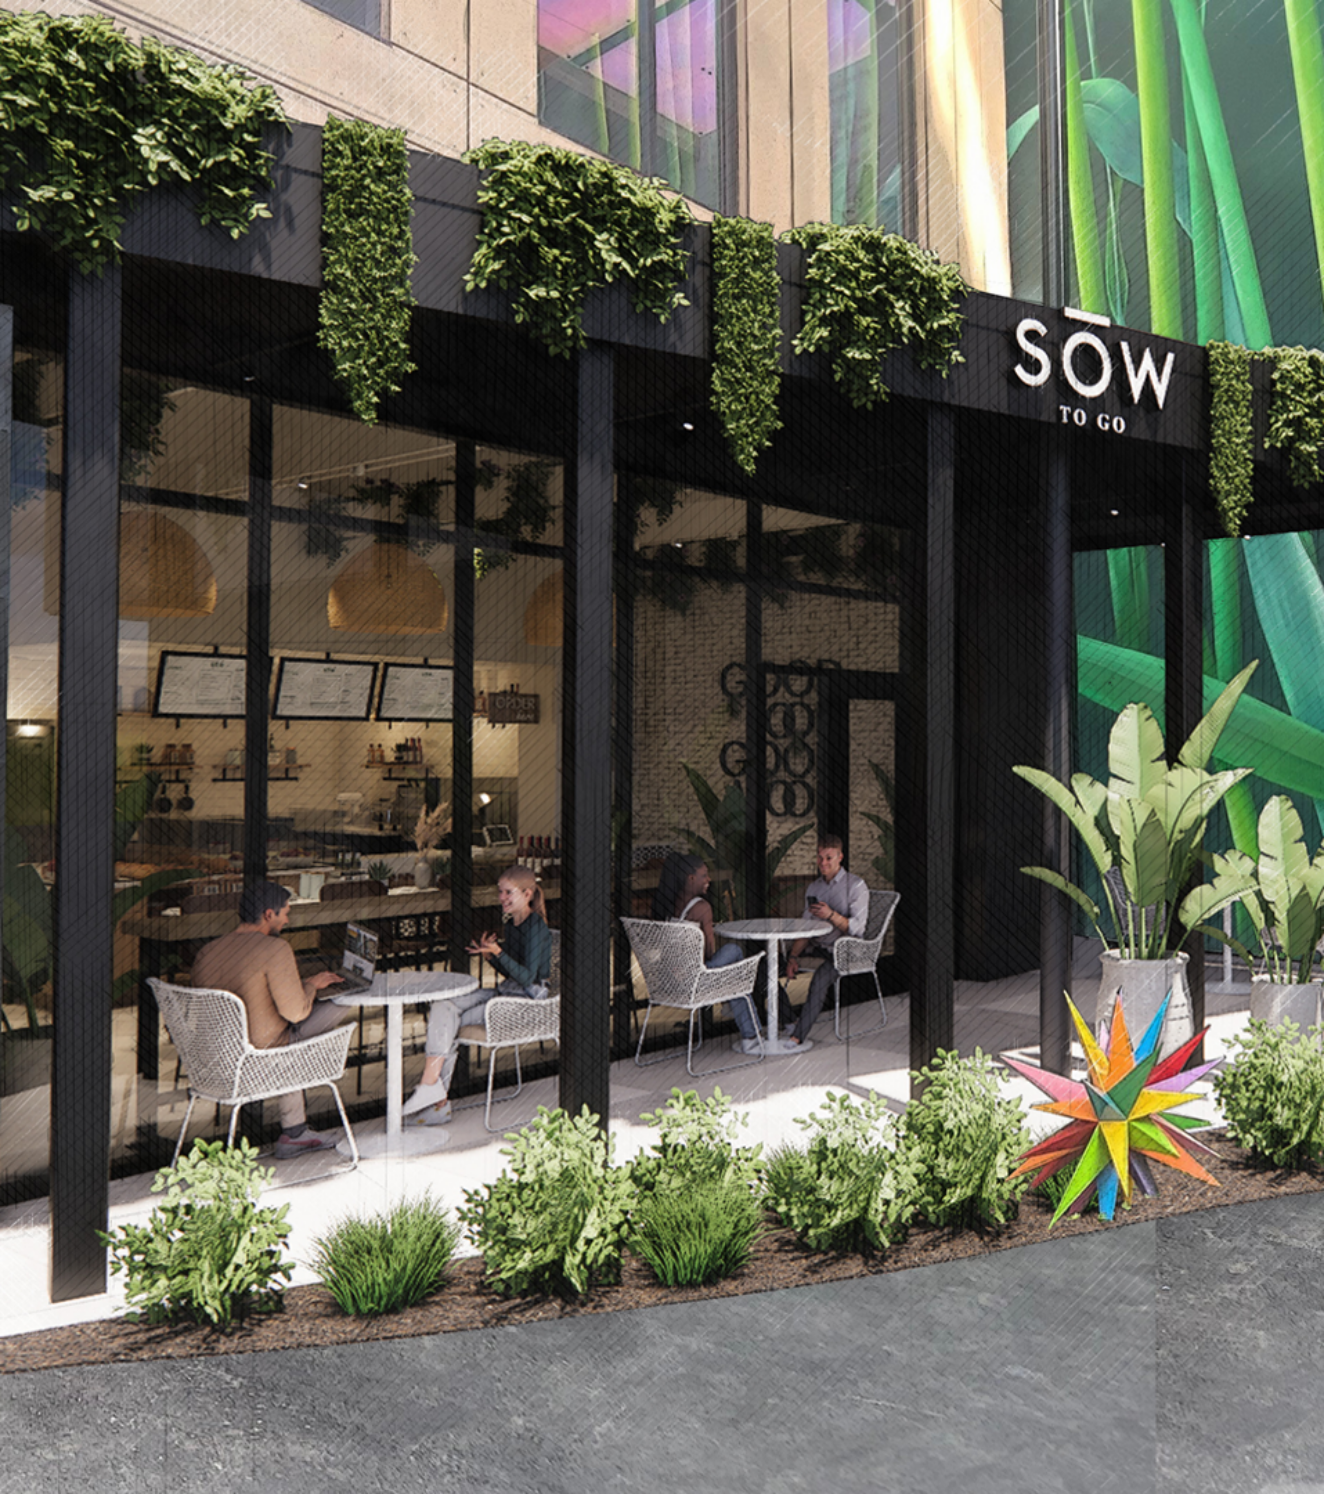 SOW Plated will open SOW To Go restaurants in Franklinton, Short North later this year